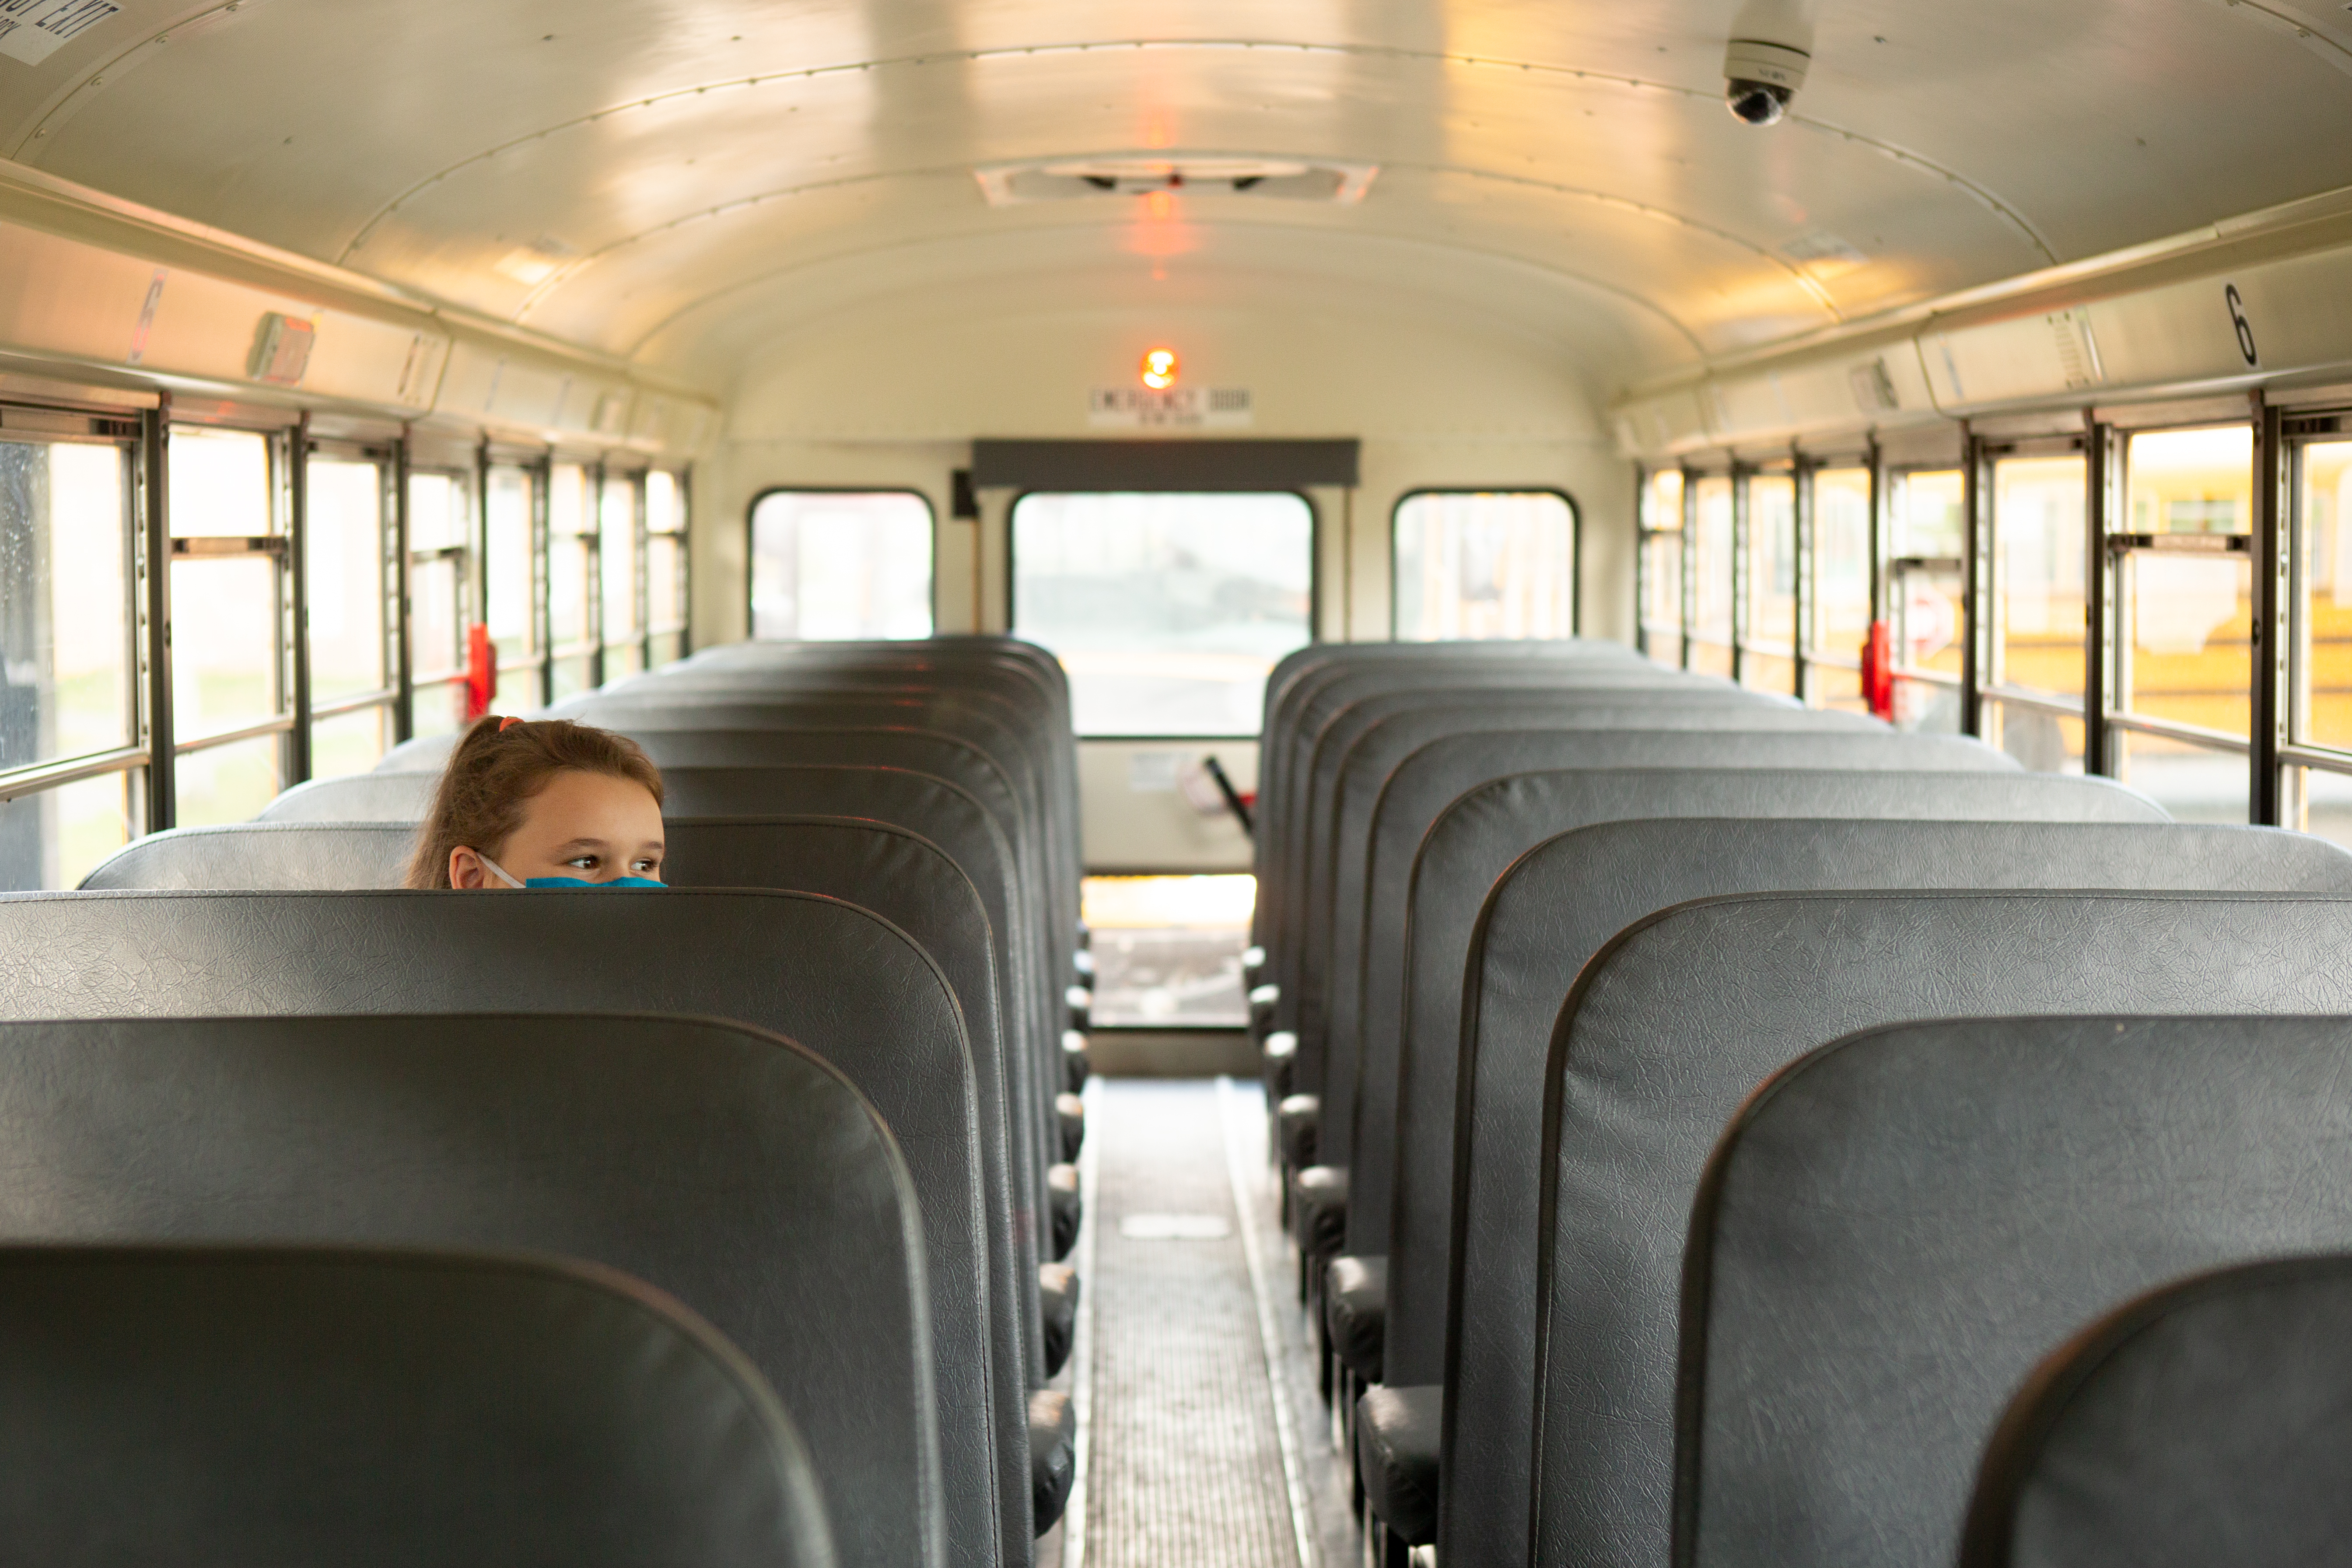 A girl waits inside a nearly empty school bus at the end of the school day. 